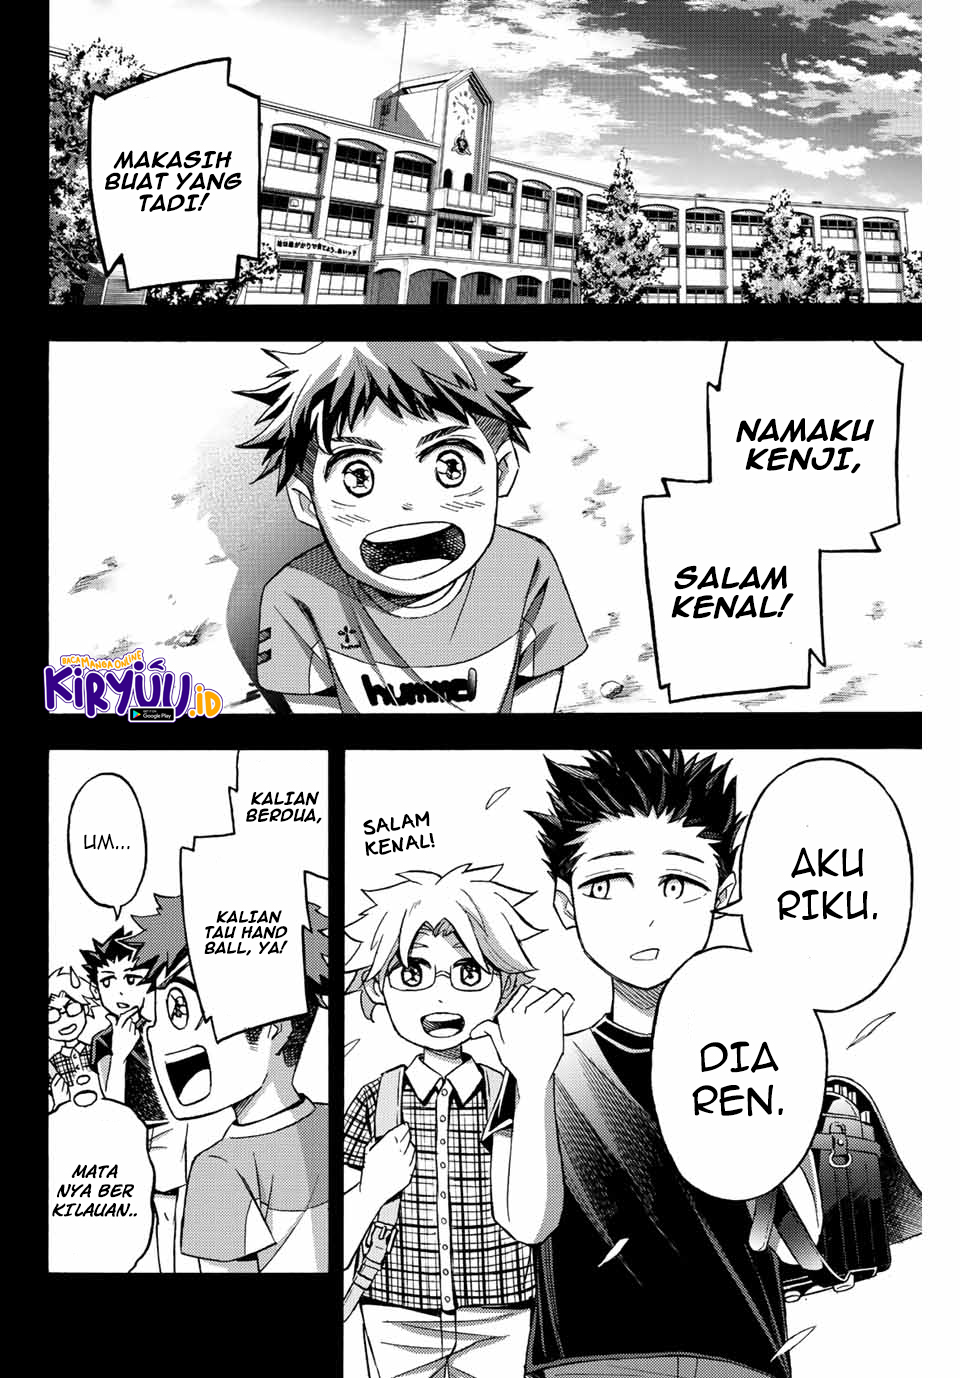 Little Hands Chapter 25.1 Bahasa Indonesia